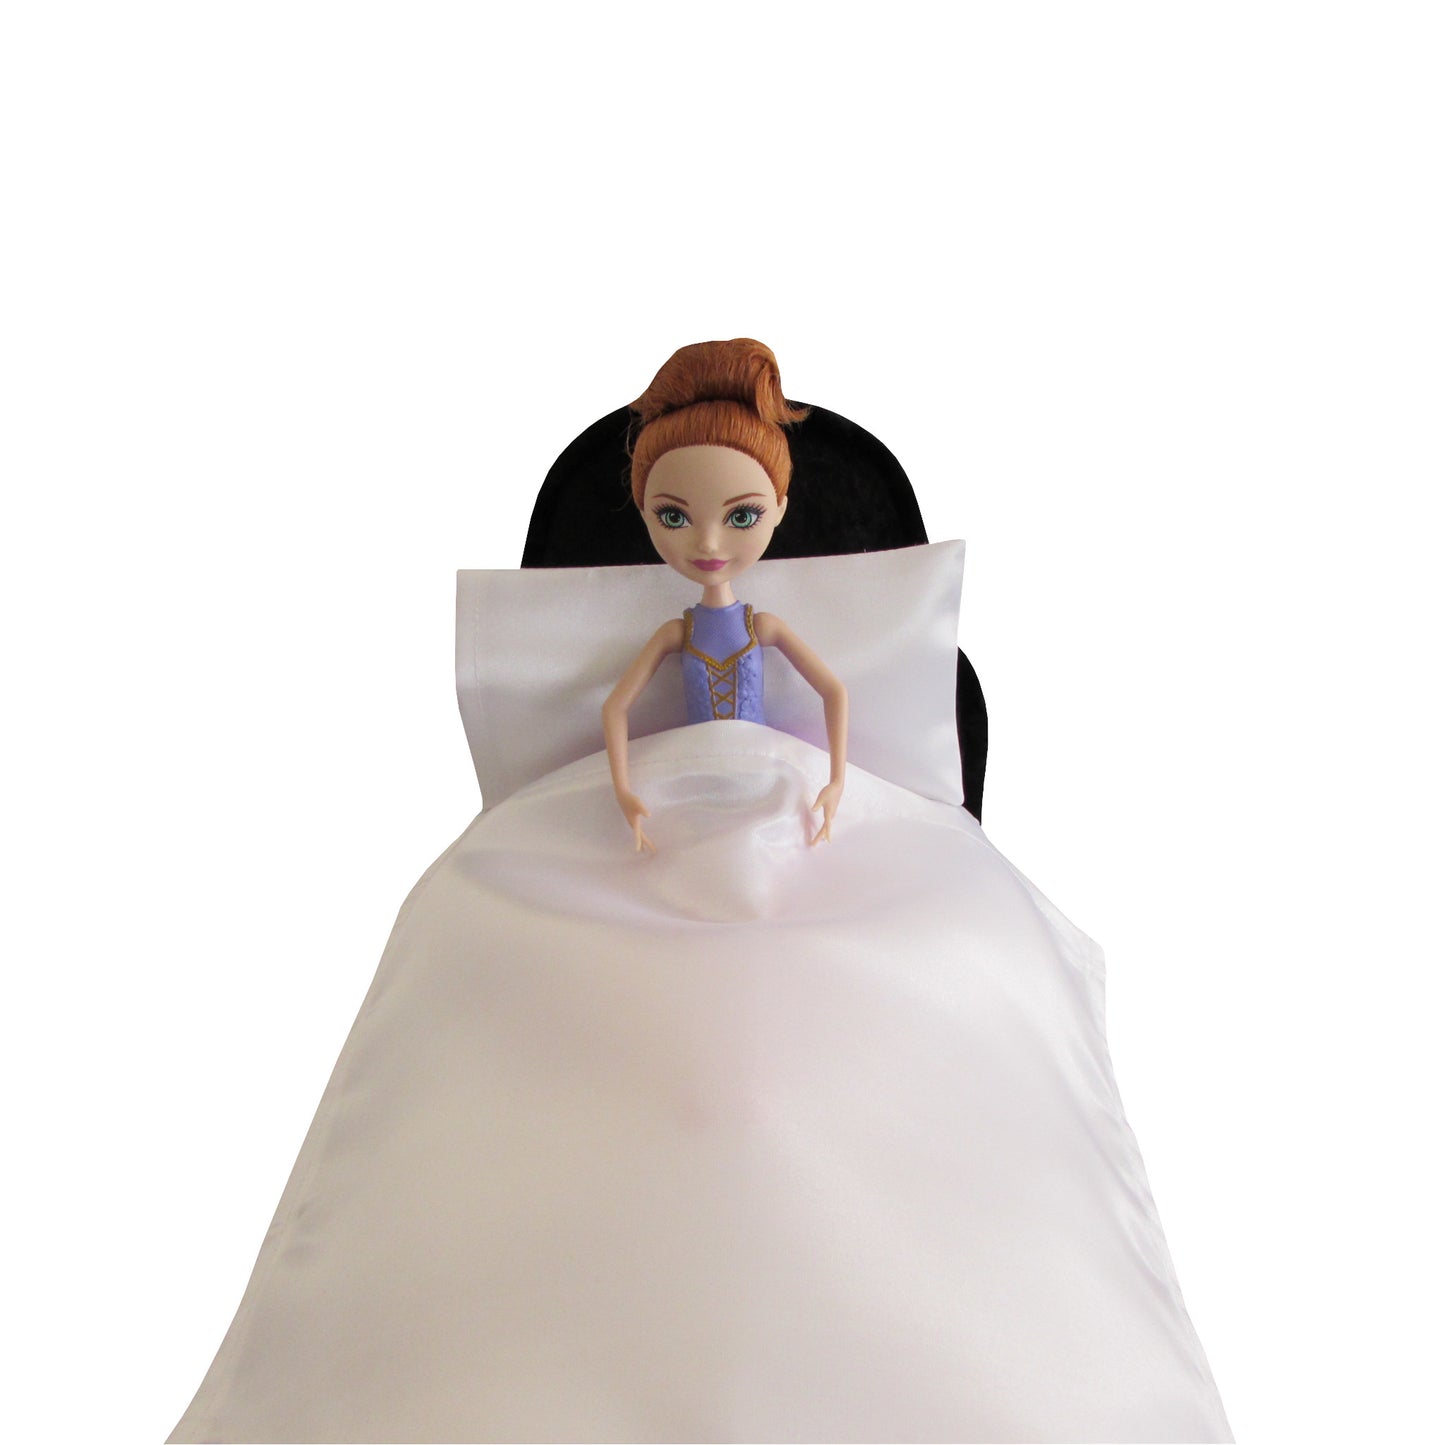 White Satin Doll Fitted Sheet, Pillow, and Black Crushed Velvet Doll Bed for 11.5-inch and 12-inch dolls with ballerina doll